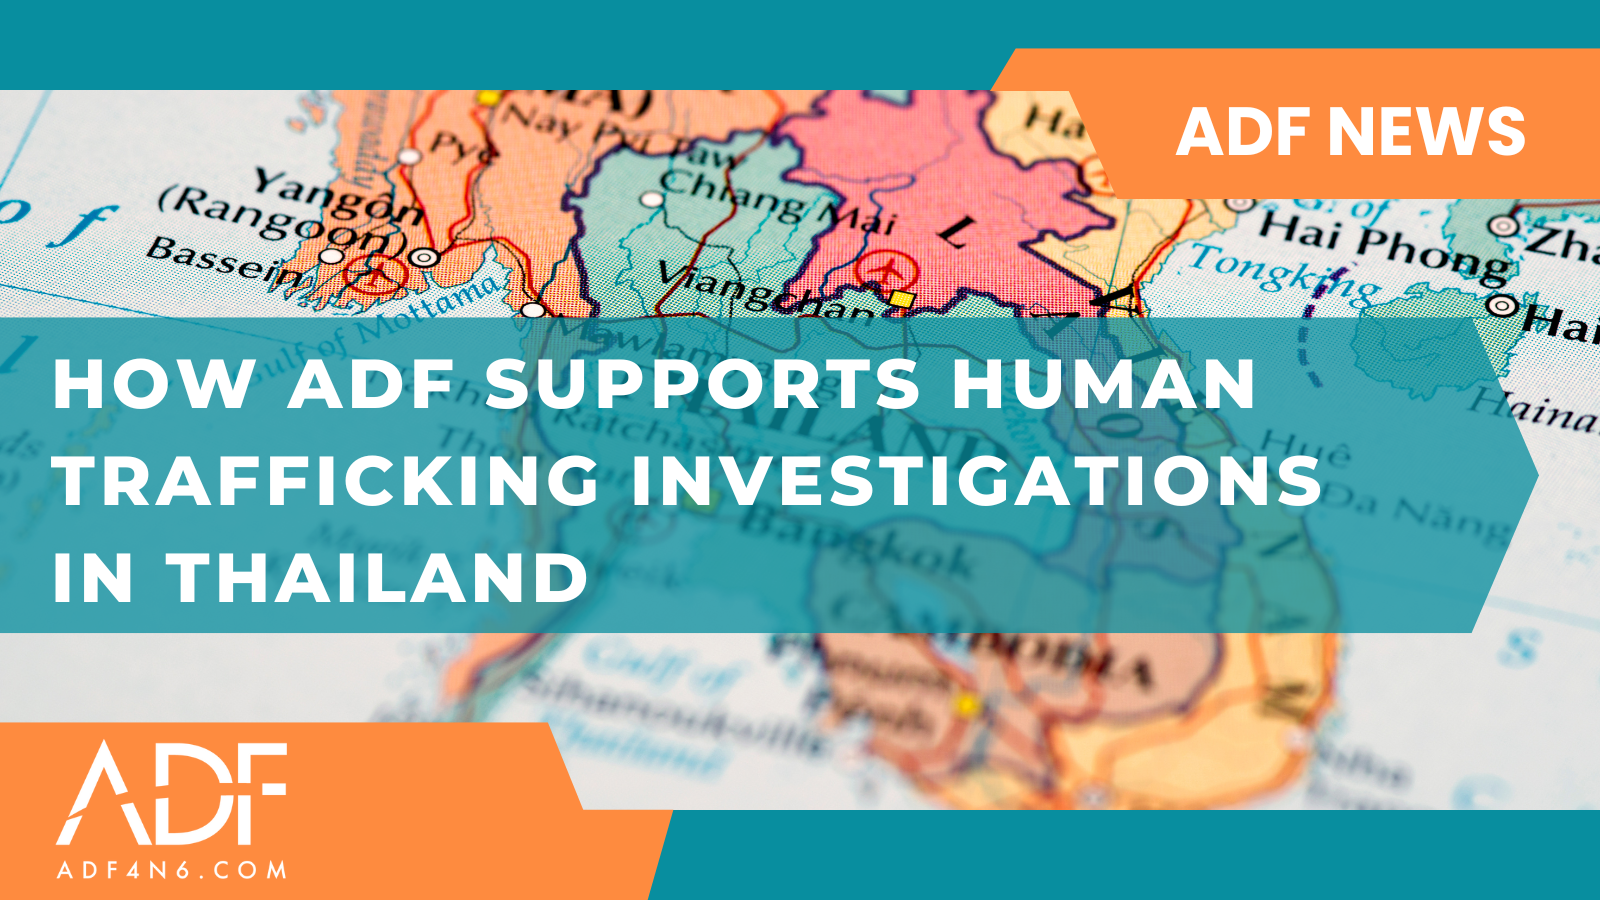 How ADF Supports Human Trafficking Investigations in Thailand